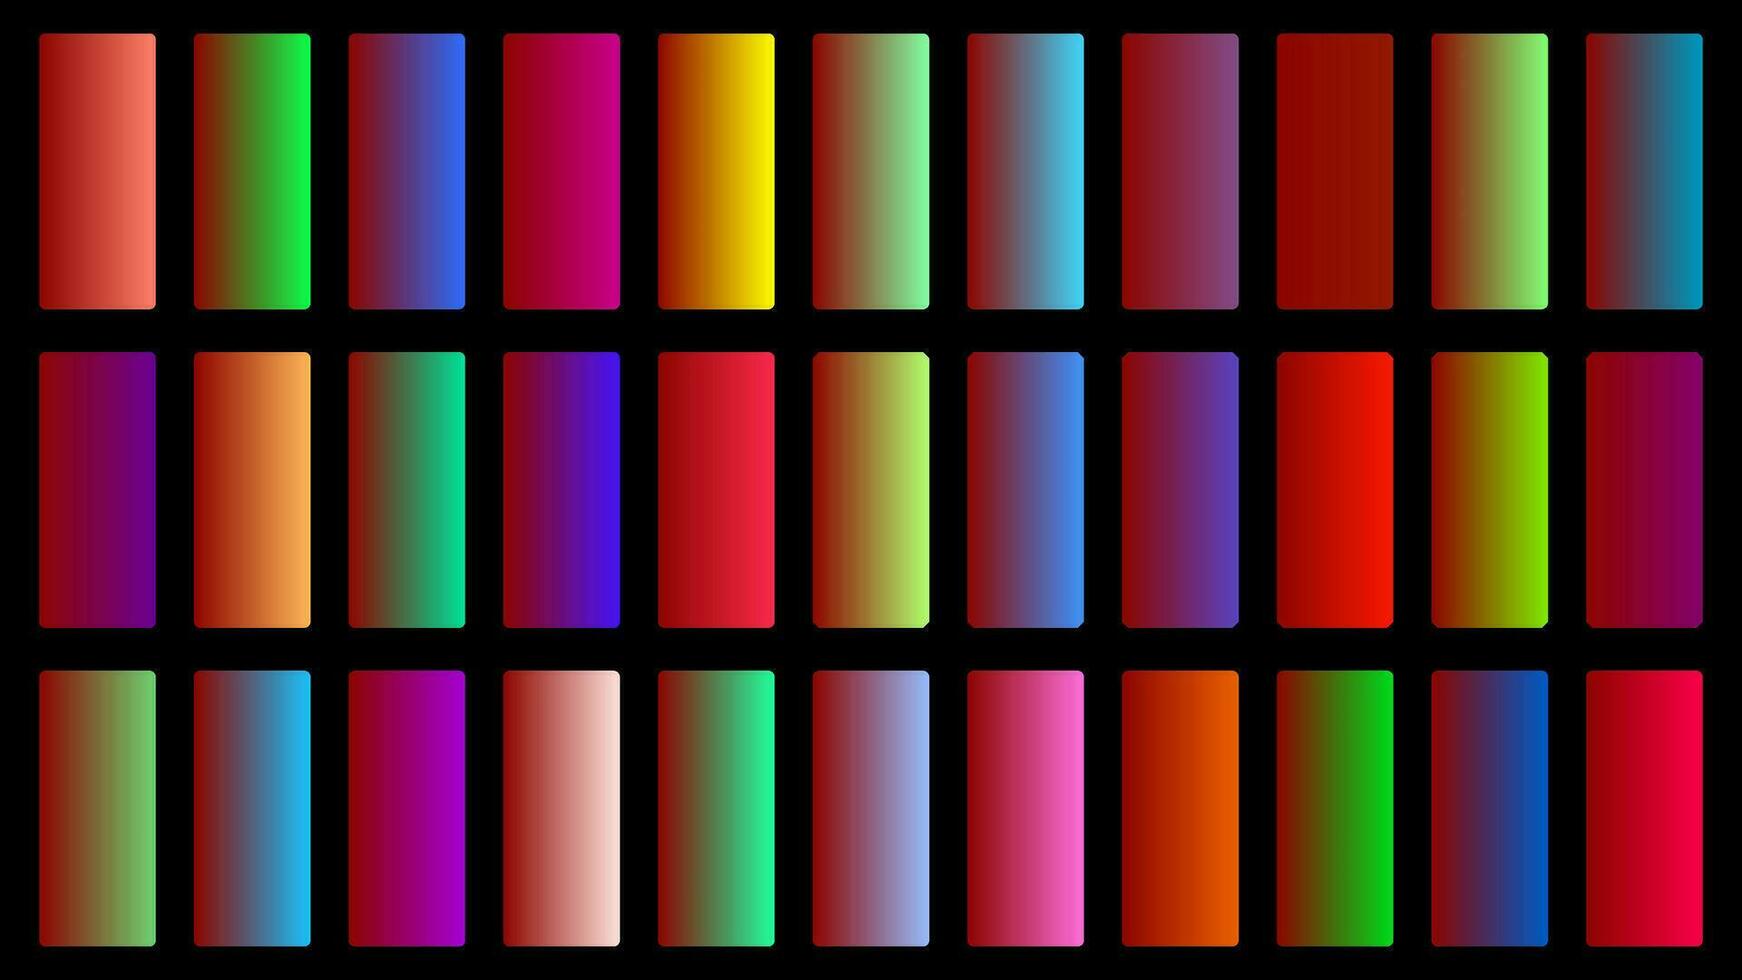 Colorful Ruby Color Shade Linear Gradient Palette Swatches Web Kit Rounded Rectangles Template Set vector